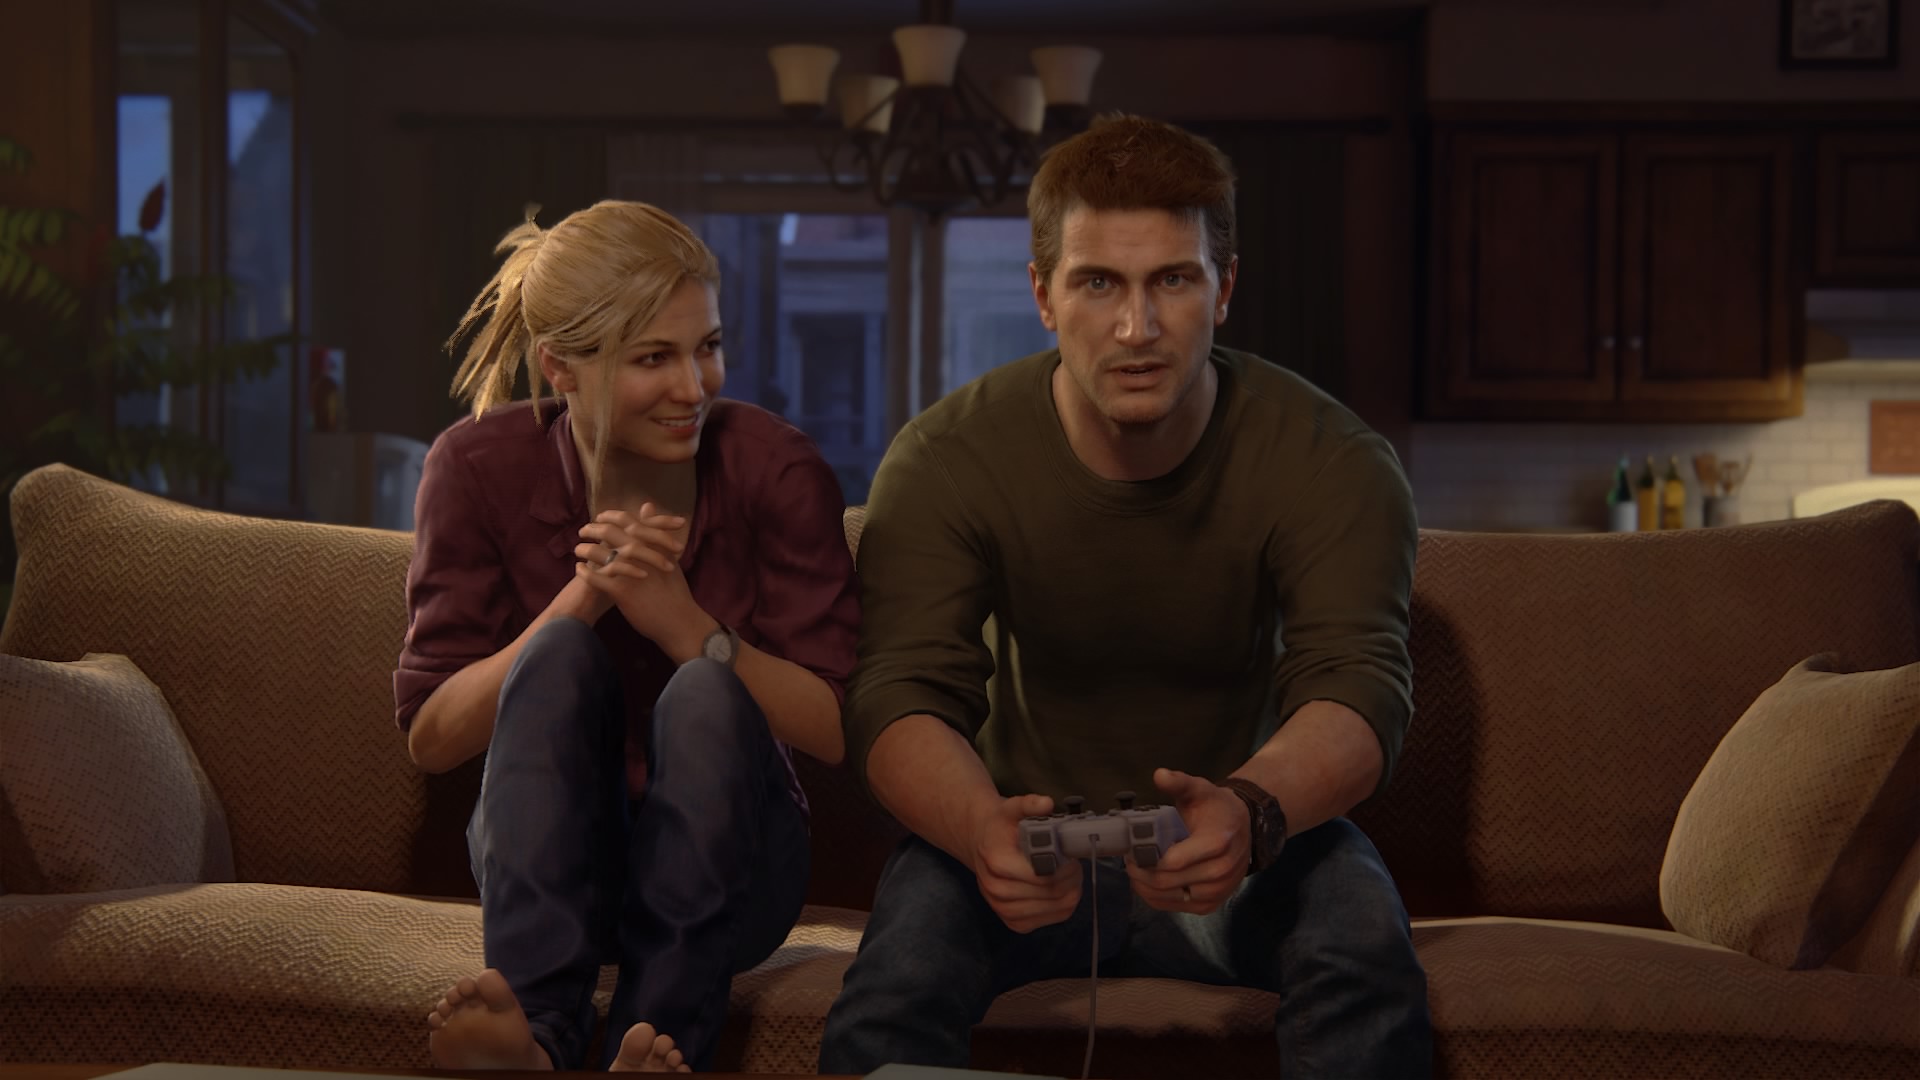 Uncharted 4: A Thief's End Gameplay Video Introduces Nathan